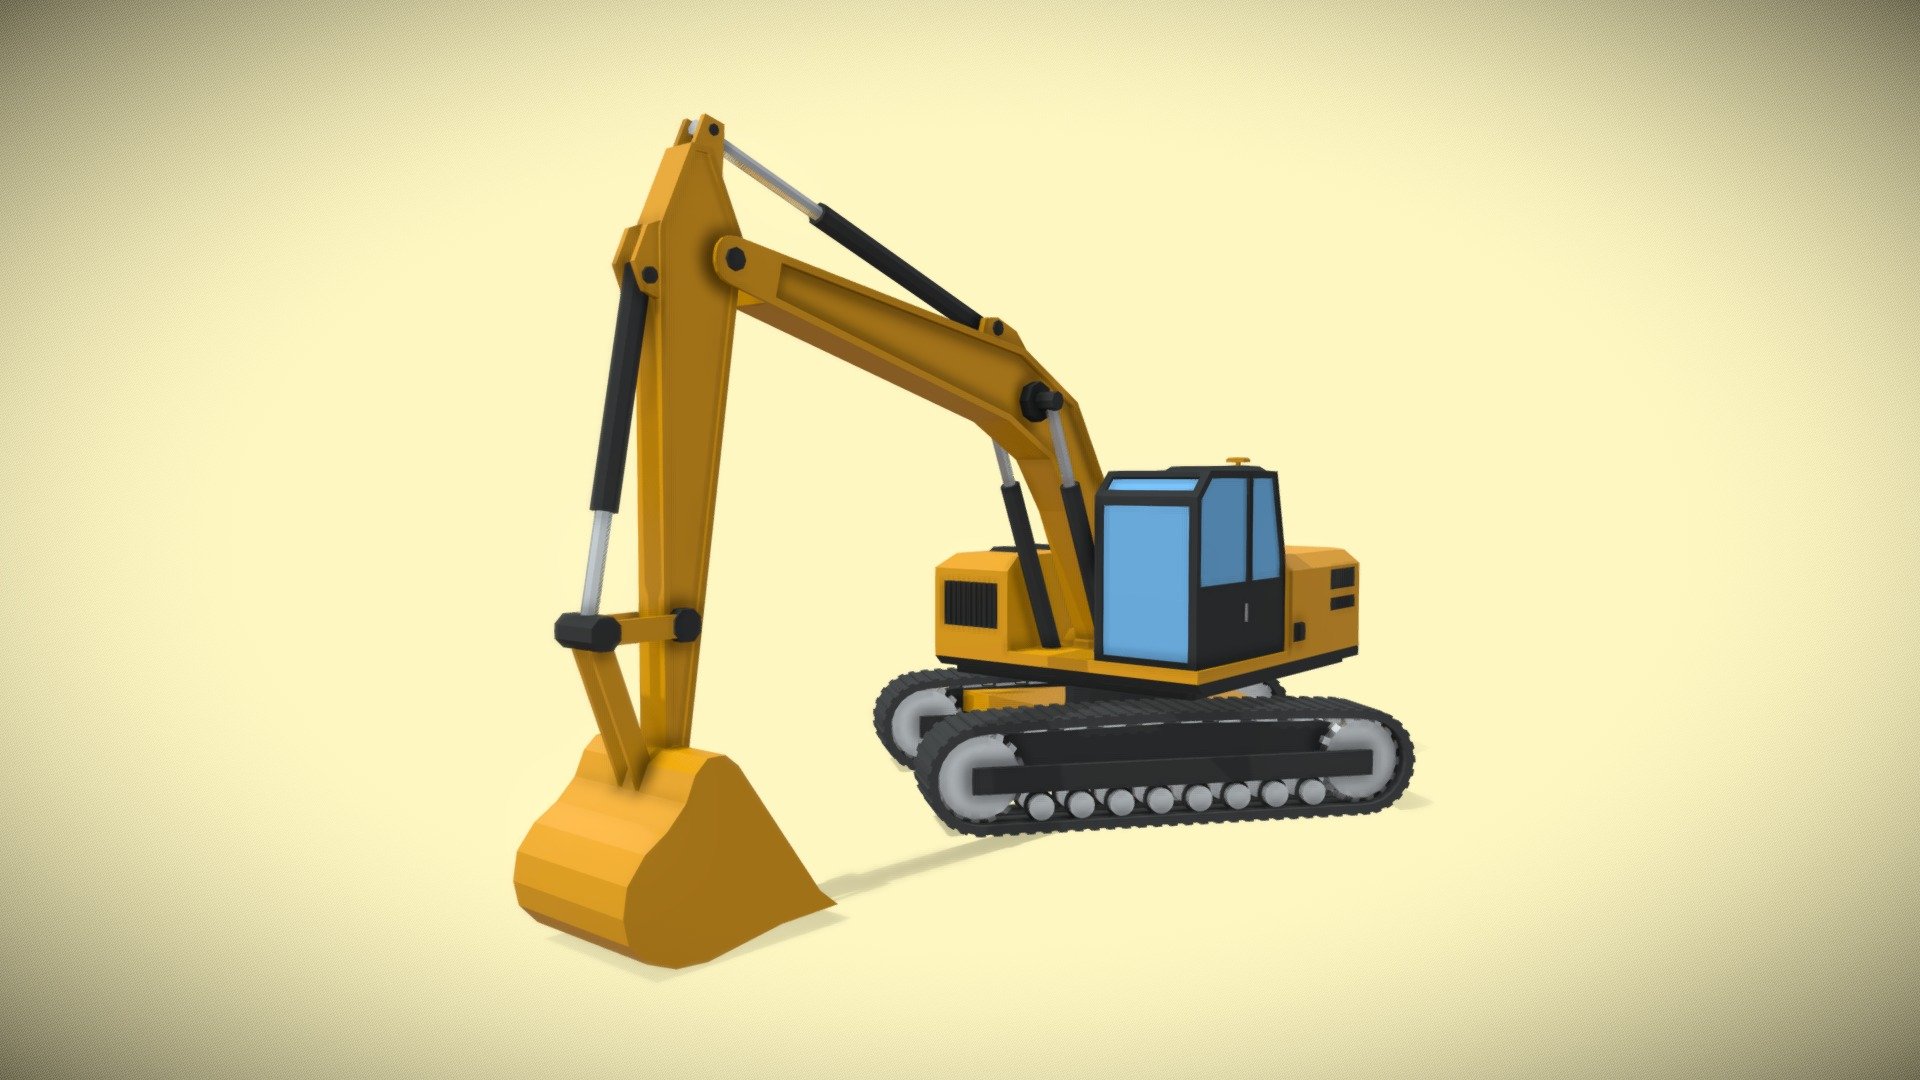 Simple low poly model of a construction excavator.
Ready to be used in games or other projects 3d model